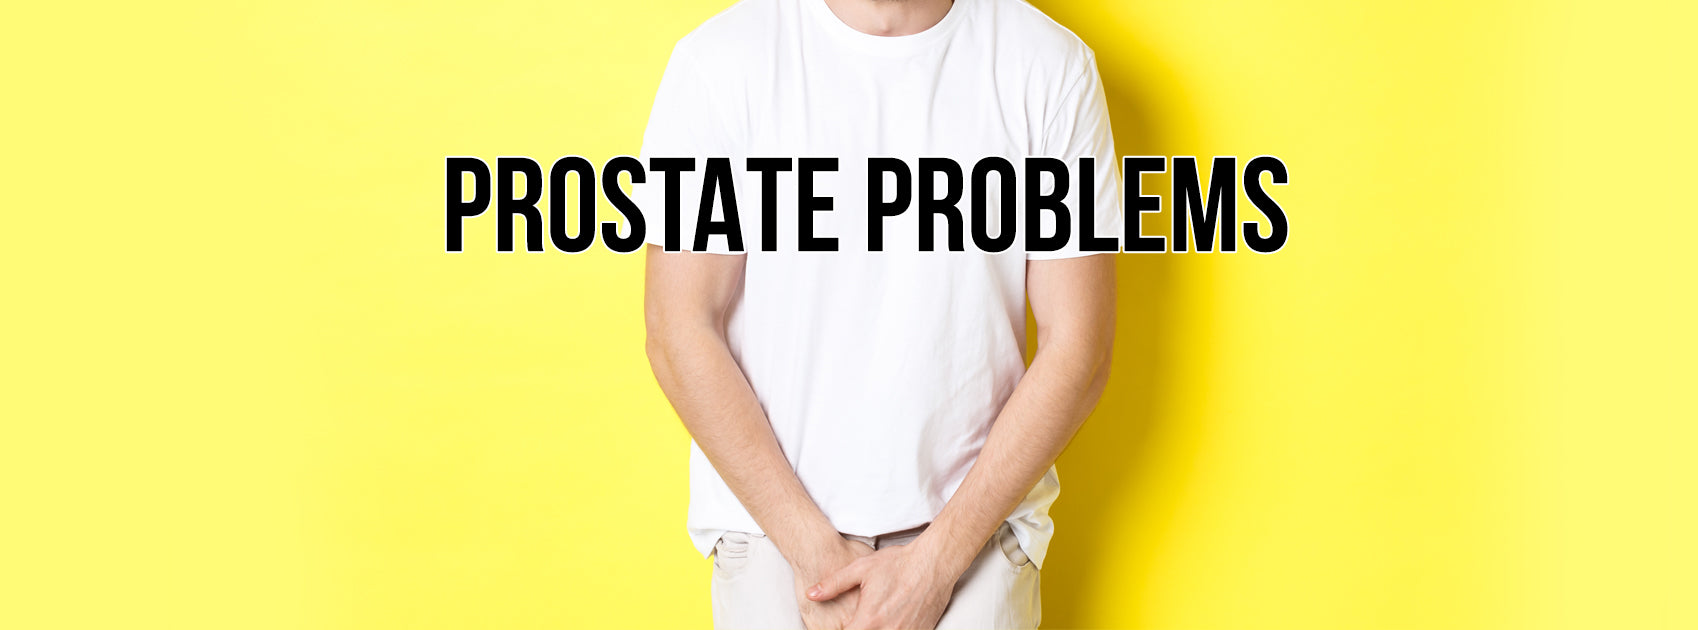 PROSTATE PROBLEMS - CAUSES, SYMPTOMS & HOW TO TREAT IT